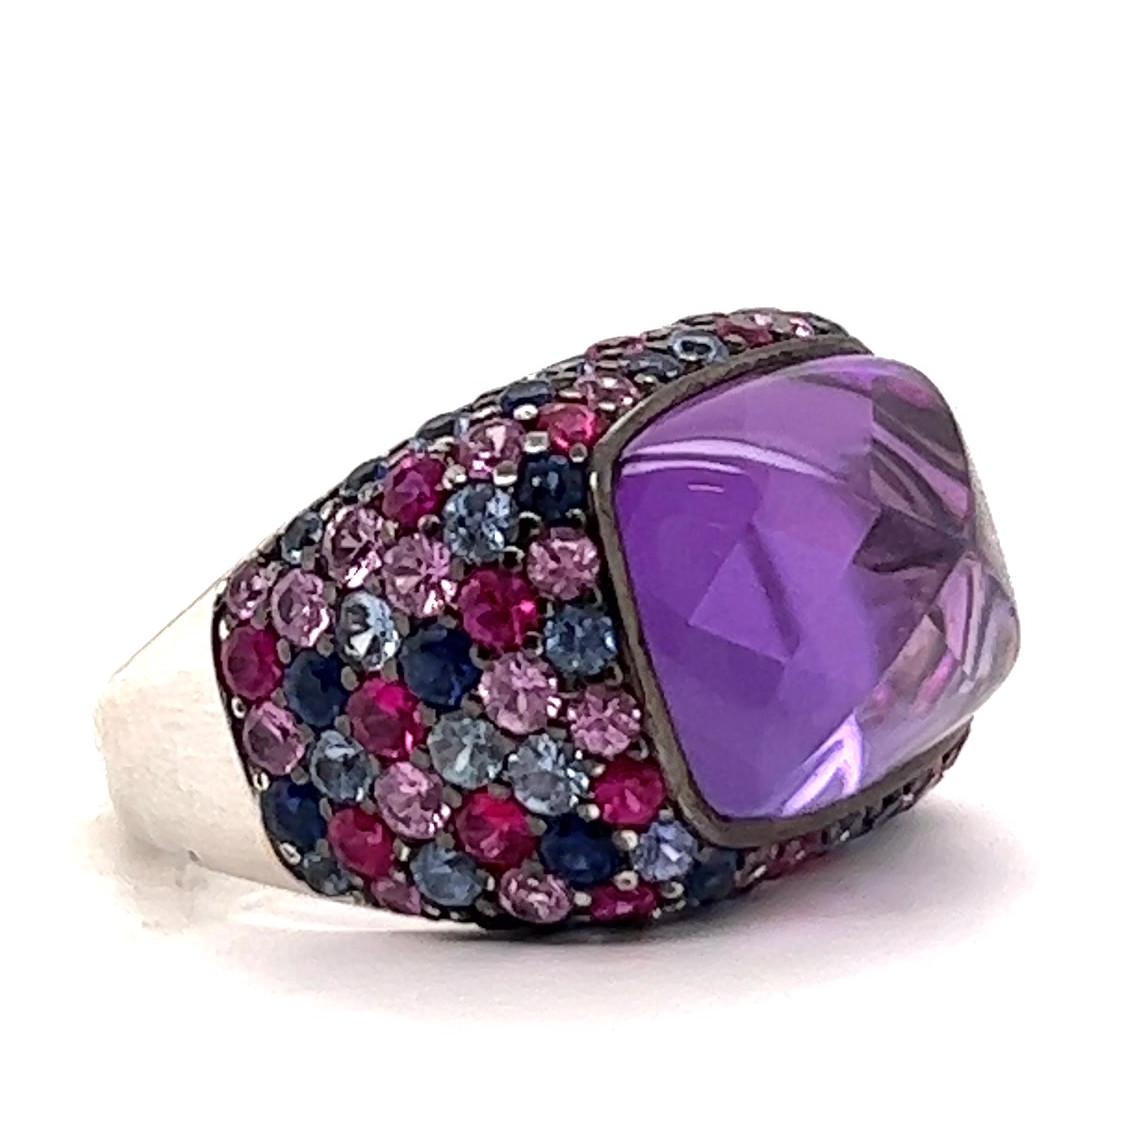 One Henri Sillam Amethyst Sapphire White Gold Cocktail Ring. Featuring one fancy cut amethyst of 11.27 carats. Accented by 54 round pink sapphires with a total weight of 2.65 carats, and 54 round blue sapphires with a total weight of 2.60 carats.